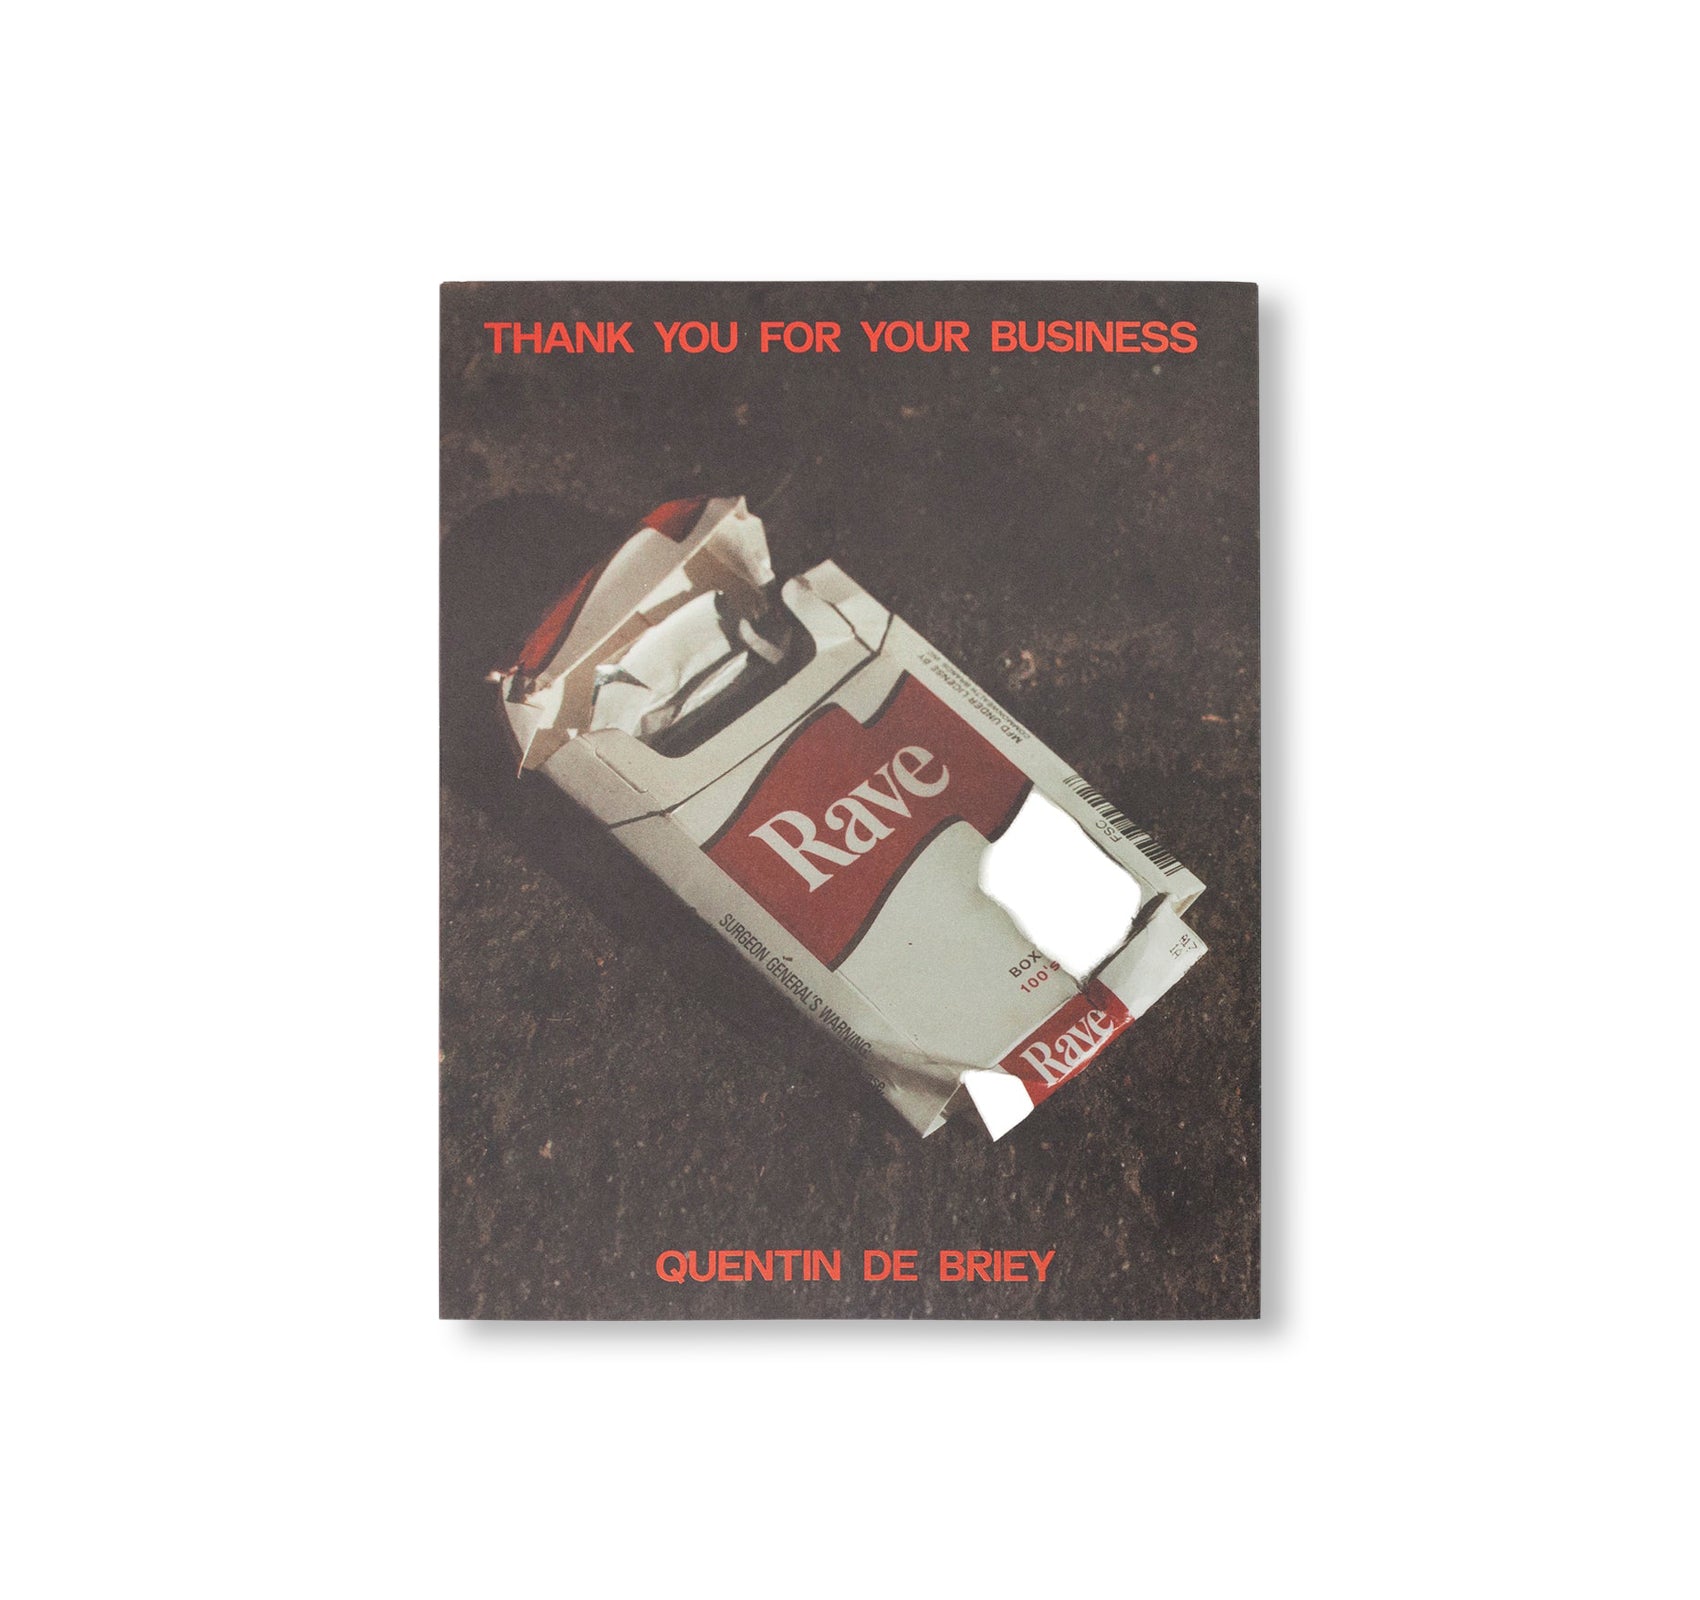 THANK YOU FOR YOUR BUSINESS by Quentin de Briey [SPECIAL EDITION 